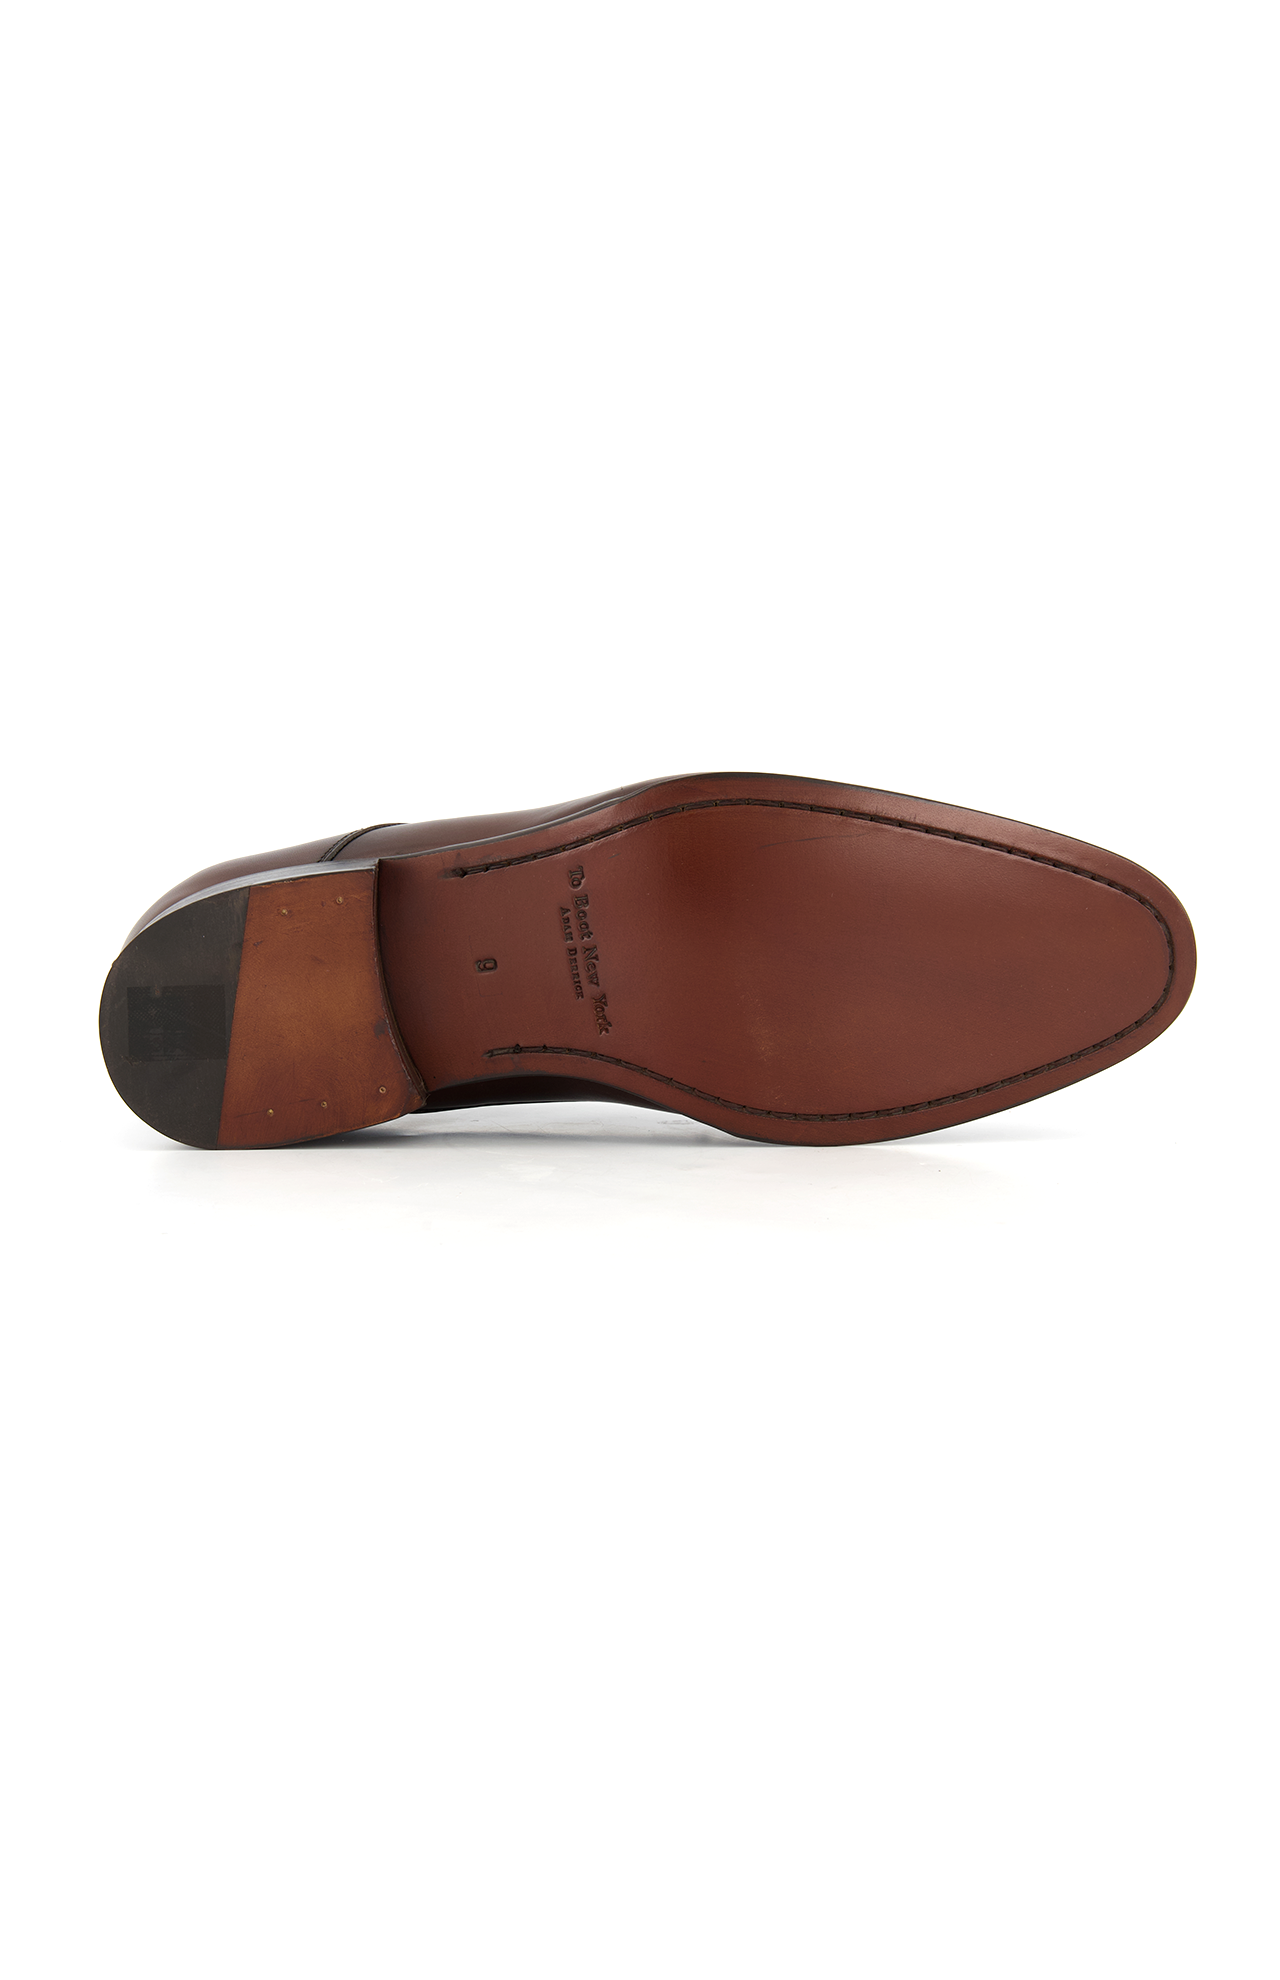 Declan Lace Up Cacao Sole Image (6834516066419)